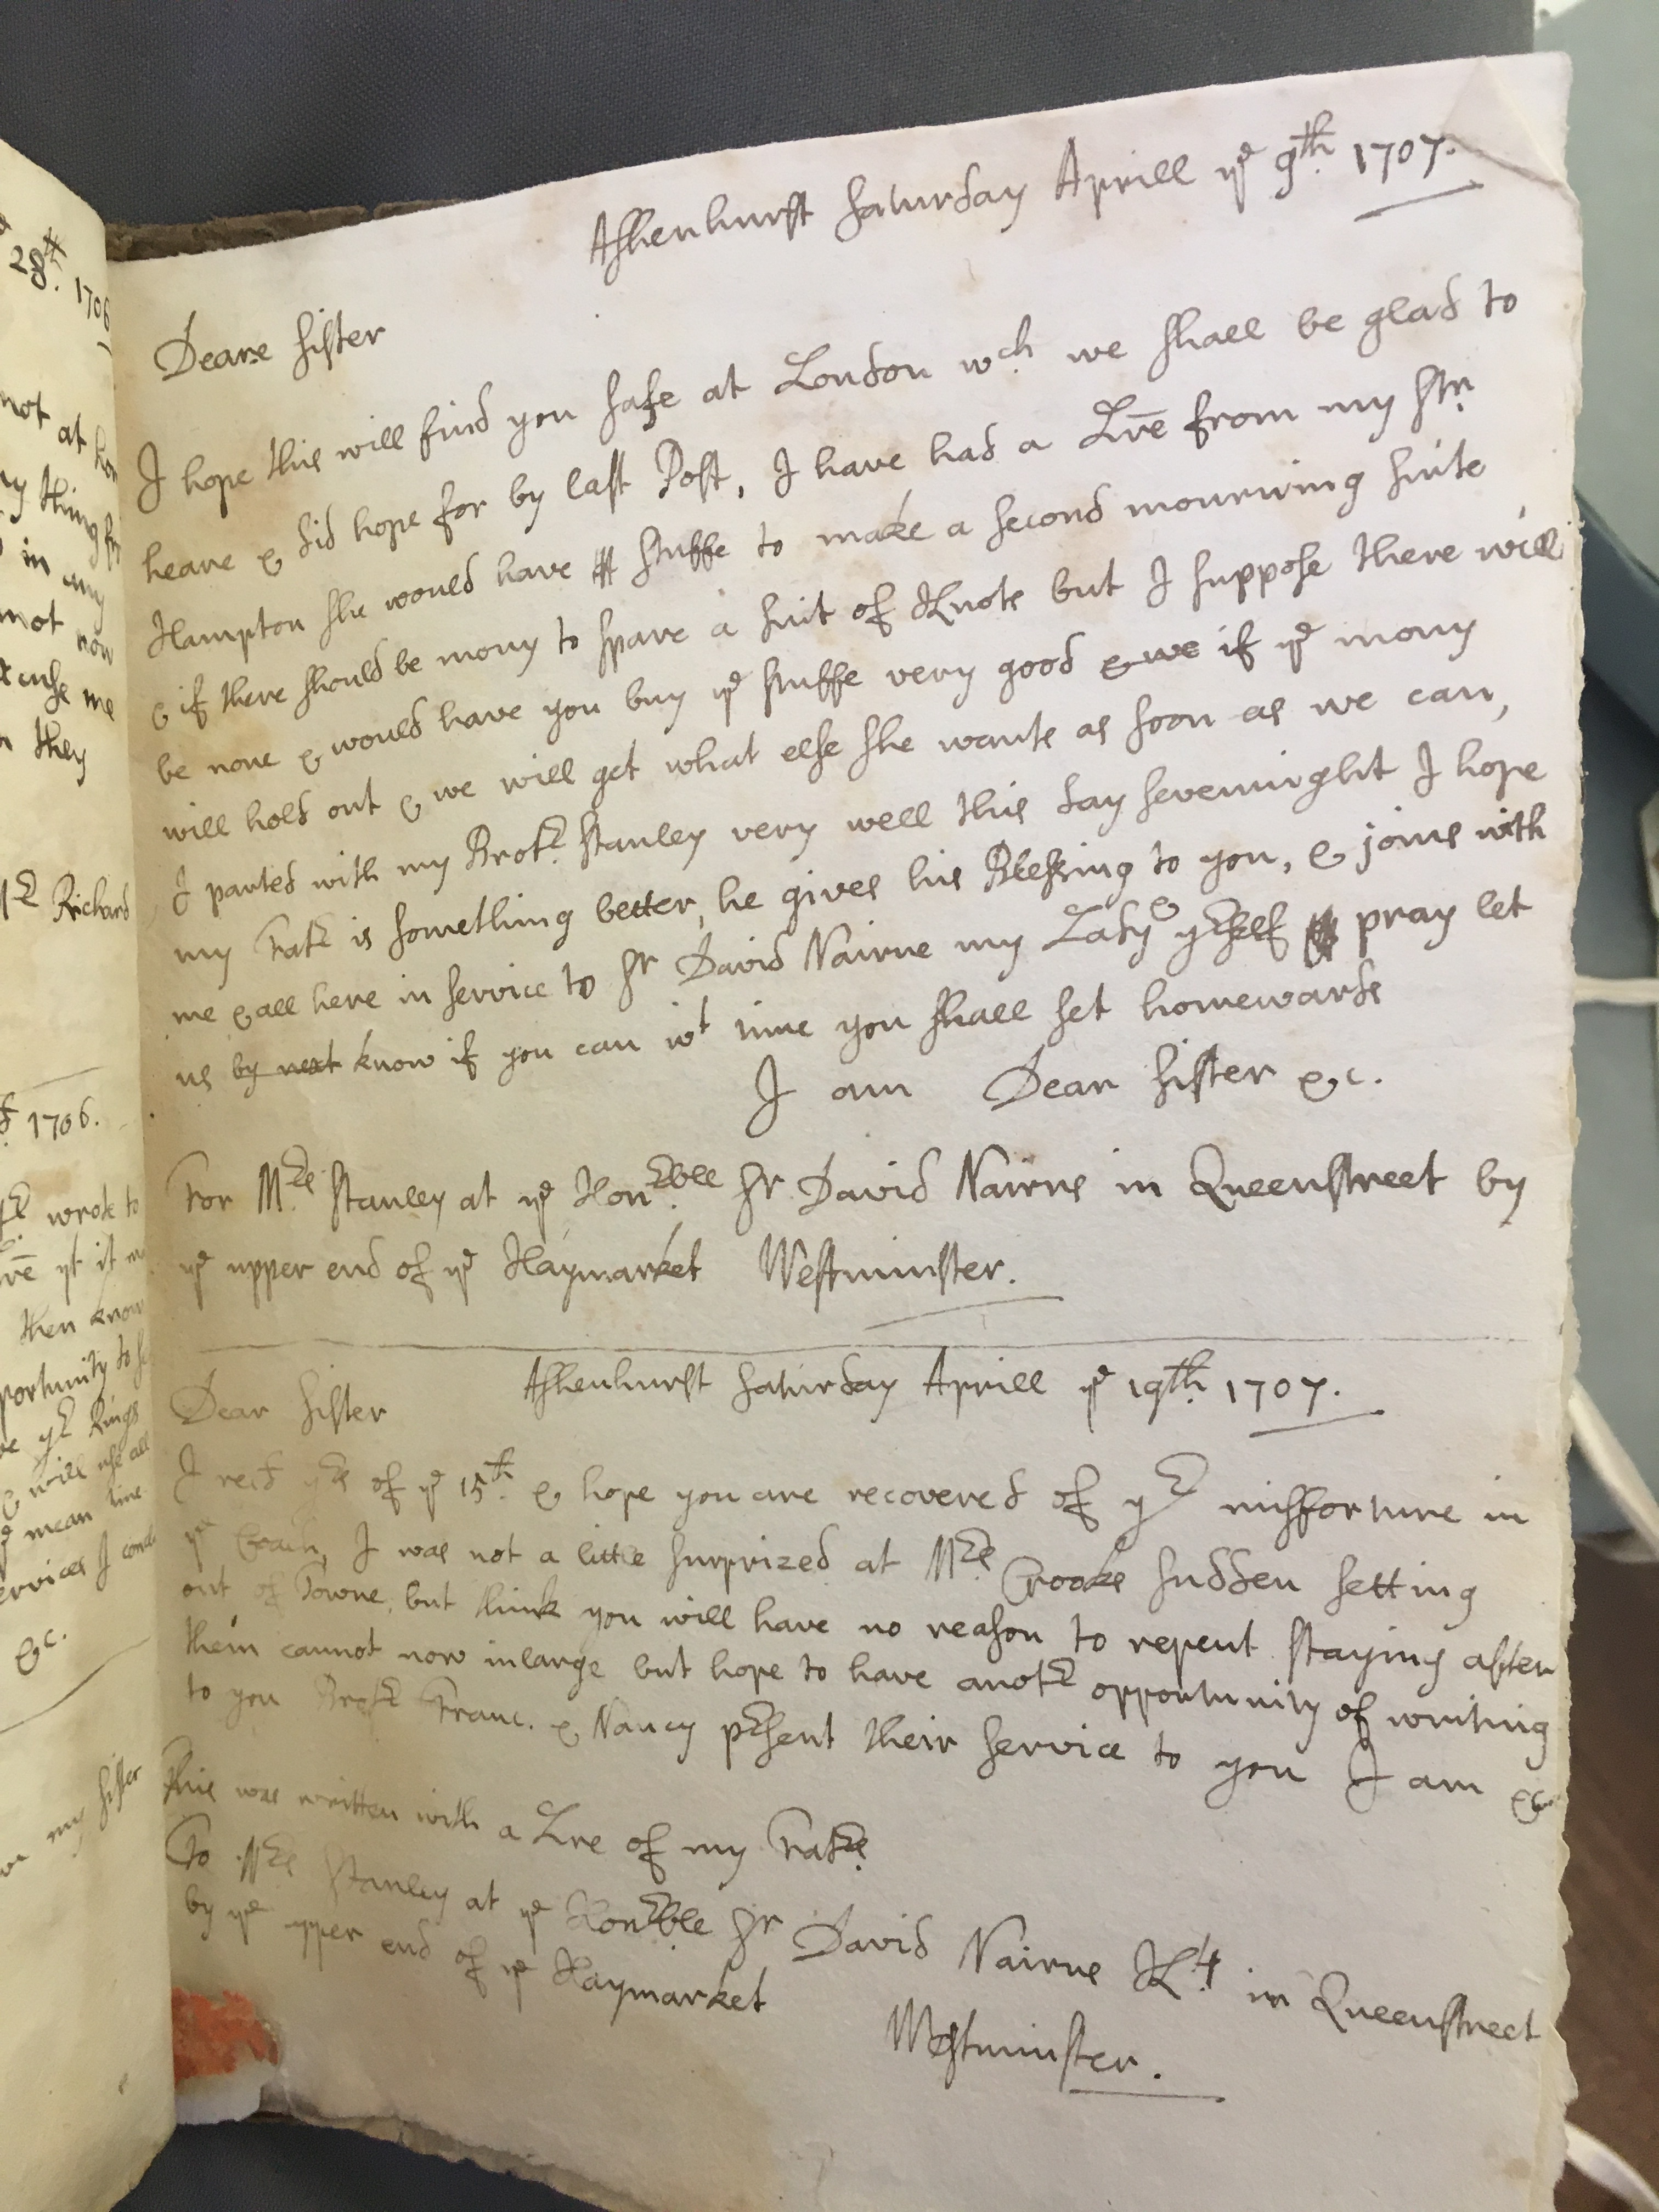 Image #1 of letter: Thomas Hollinshead to his Sister Stanley, 9 April 1707